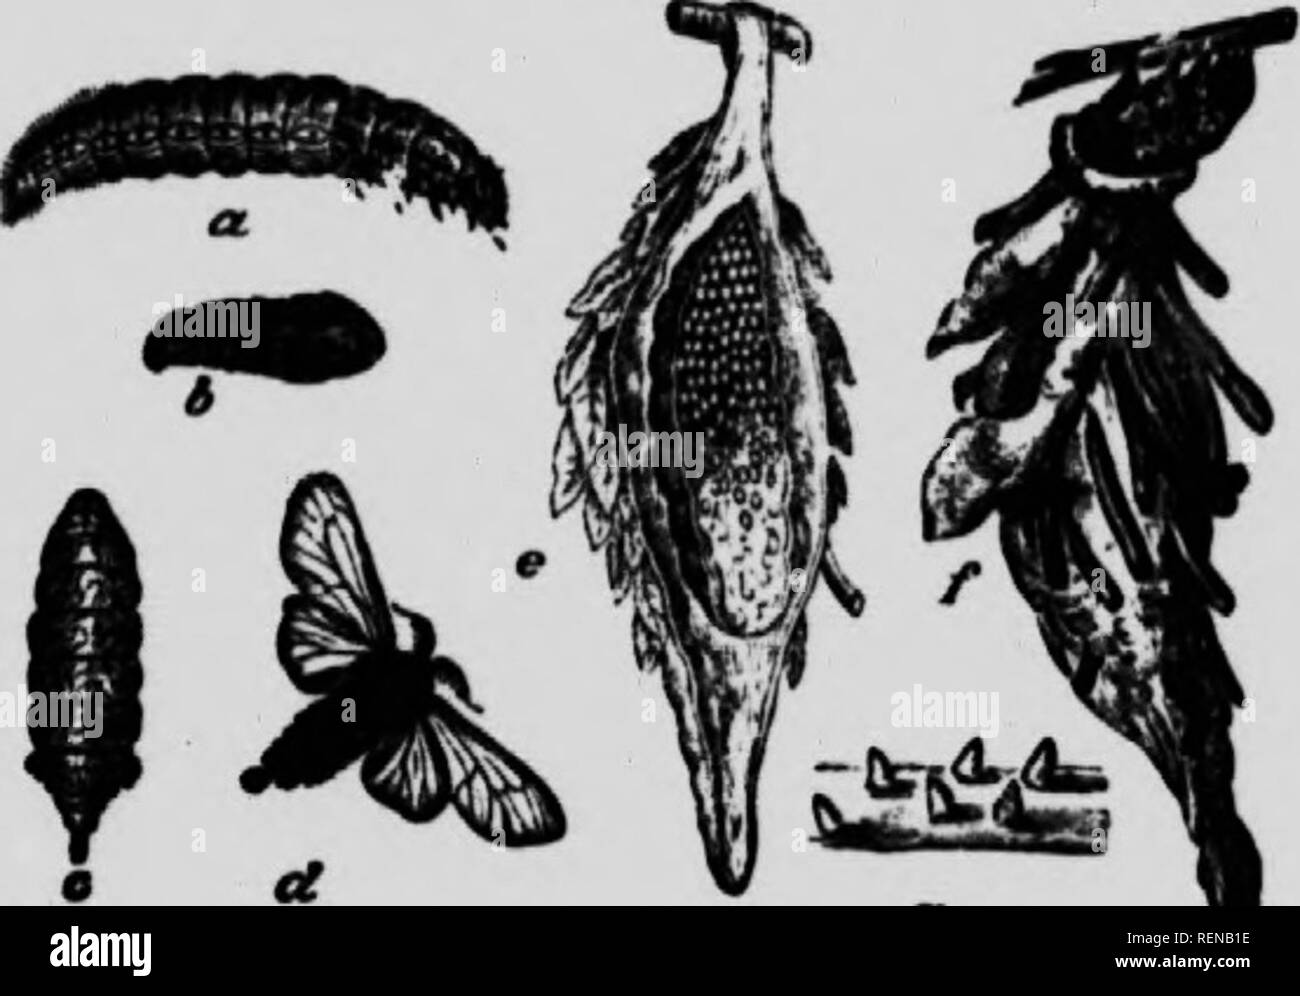 . The moth book [microform] : a popular guide to a knowledge of the moths of North America. Moths; Papillons nocturnes; Papillons nocturnes; Moths. 0Â«nuÂ« OIXETICUS Ouilding The genus is found In the holier pans ol Anier- -i. the typic;il species having originally been found in Central America. I, is also represented in southern Asia and in Australia. Three species occur in the United Staics-ââe in southern Call- forma, another in New Mexico, and a third in Florida. The latter species was named abbot! l-v fjrole, and the m.ile is delineated in F.^. W I lie wings are pale smoky brown, with dar Stock Photo